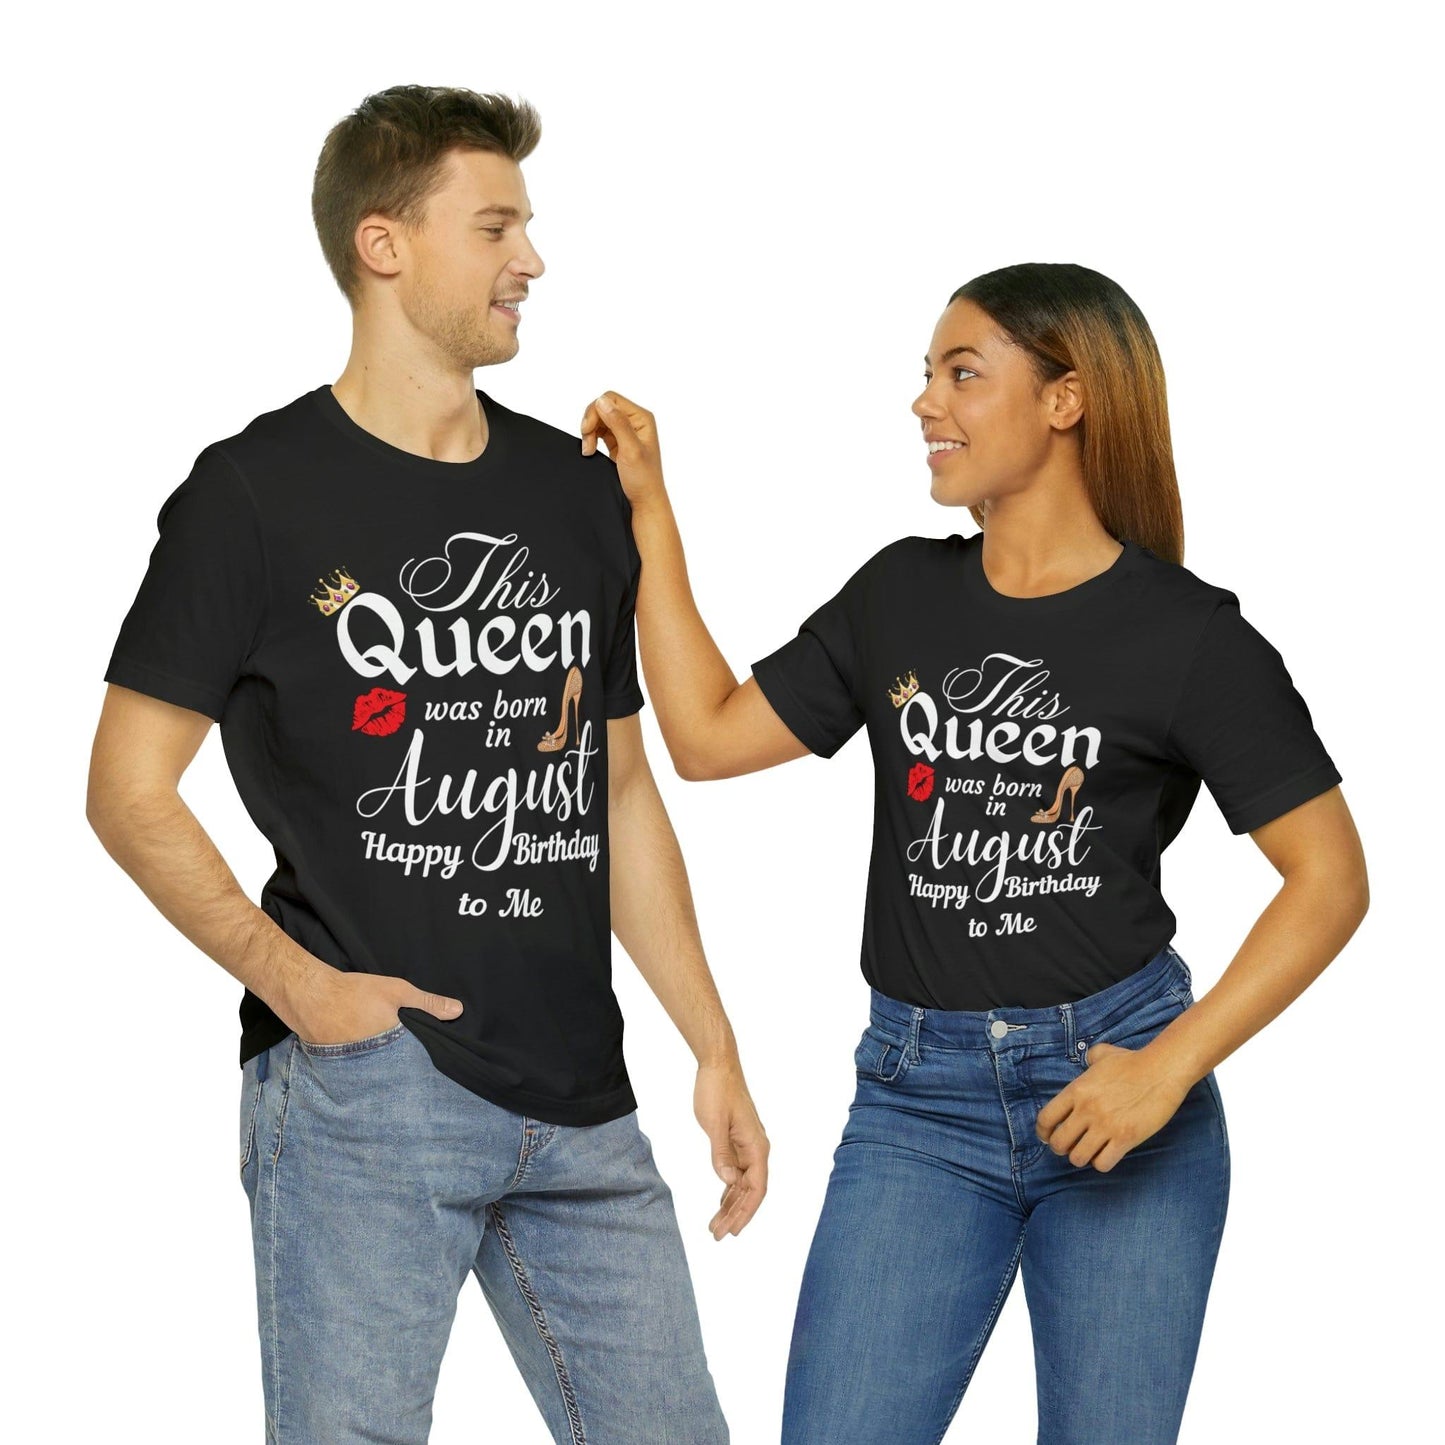 Birthday Queen Shirt, Gift for birthday, This Queen was born in August shirt, Funny Queen shirt, funny Birthday shirt, birthday gift - Giftsmojo